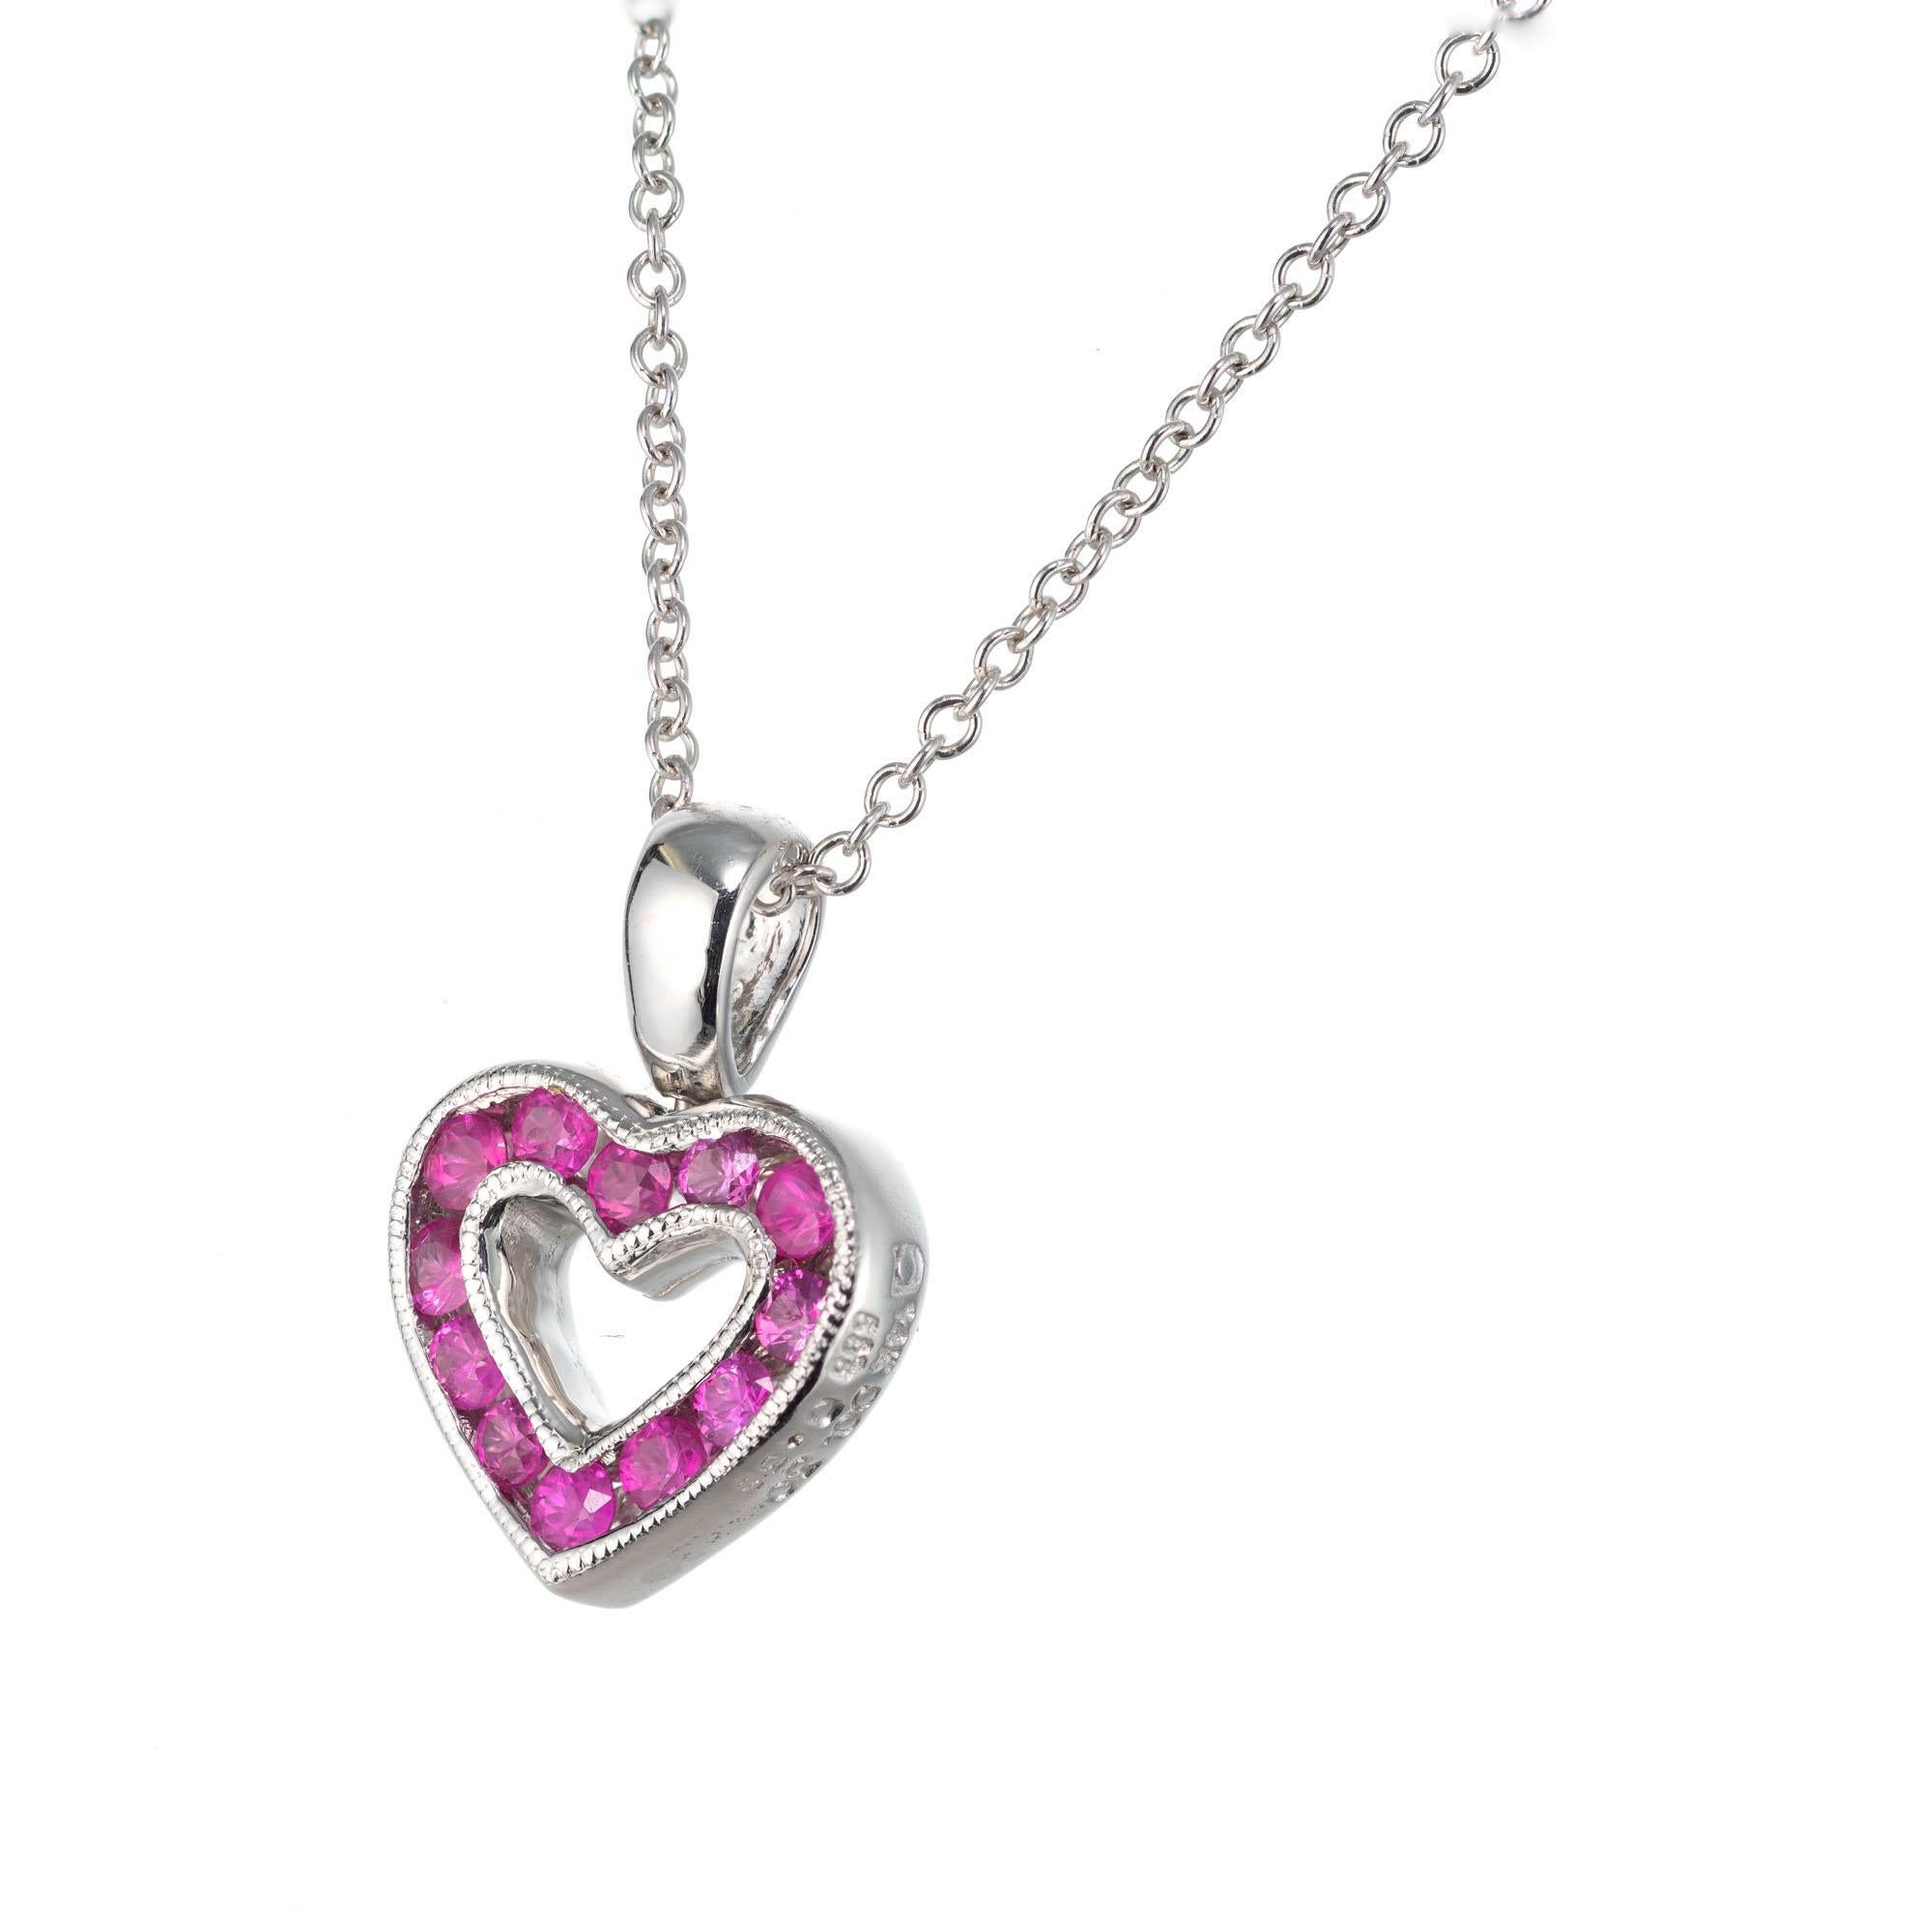 Petite reversible diamond and pink sapphire open-heart pendant in 14k white gold. Chain, 16.5 inches in length. 

12 round brilliant cut diamonds, H-I SI-I approx. .30cts
12 round pink sapphires, approx. .35cts
14k white gold 
Stamped: 14k
2.7